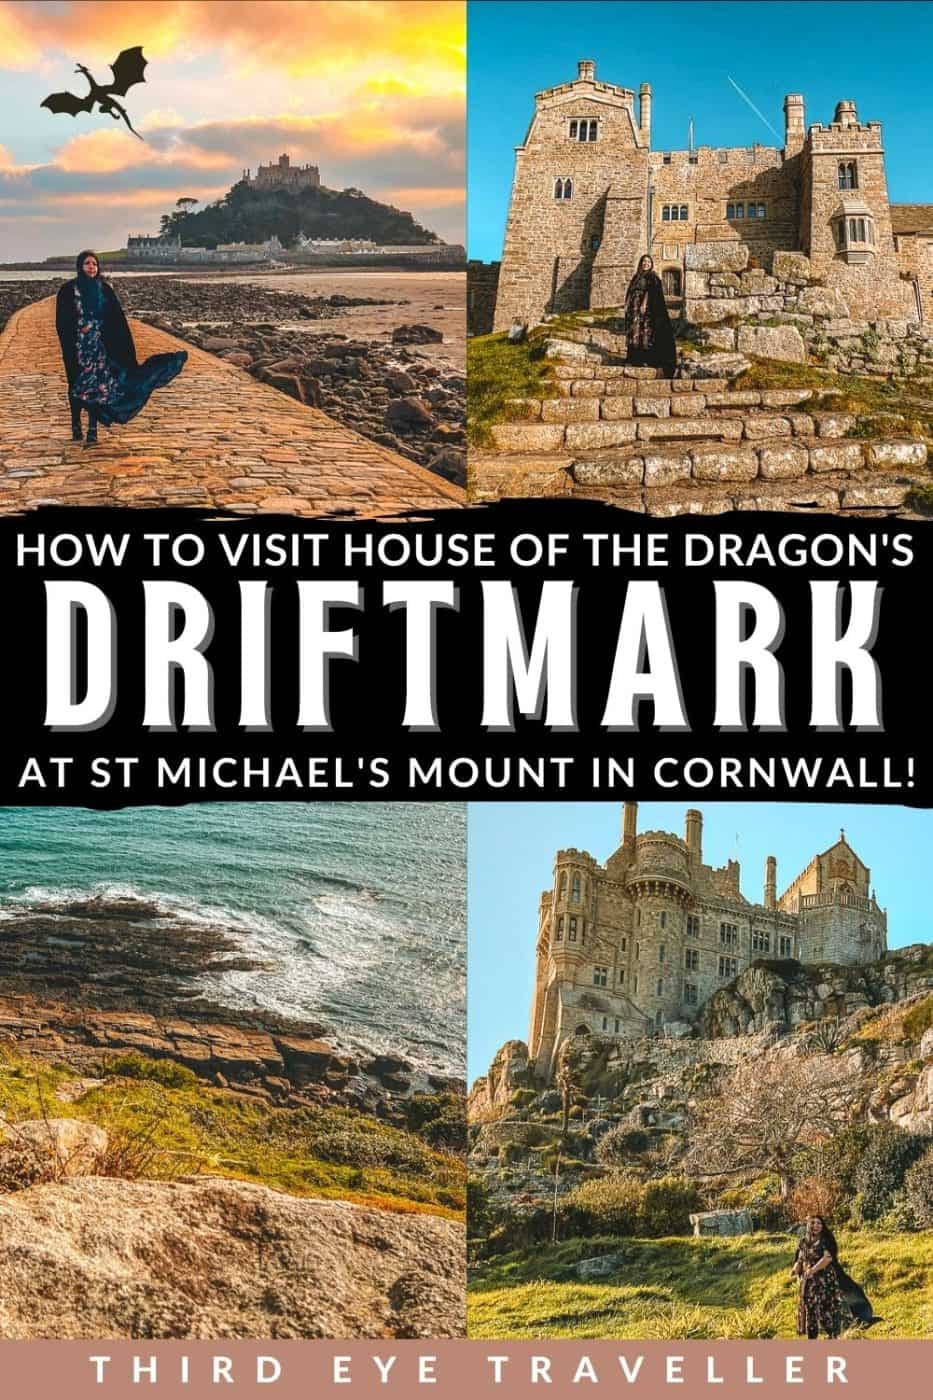 St Michaels Mount House of the Dragon Where is Driftmark filmed in House of the Dragon Cornwall